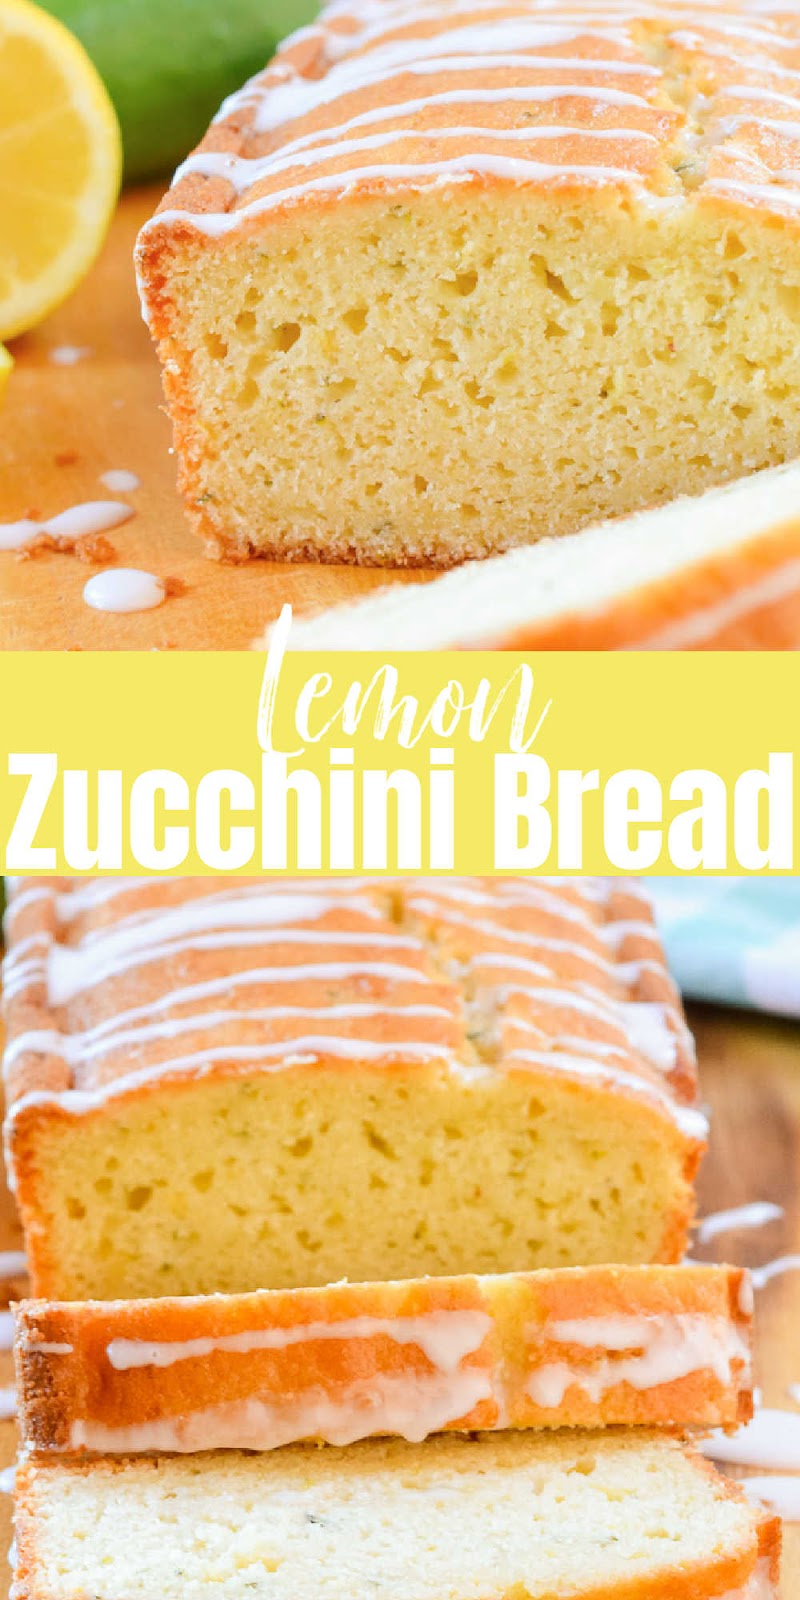 Top and botton photo are both of Lemon Zucchini Bread sliced and drizzled with lemon glaze with white text inbetween Lemon Zucchini Bread.